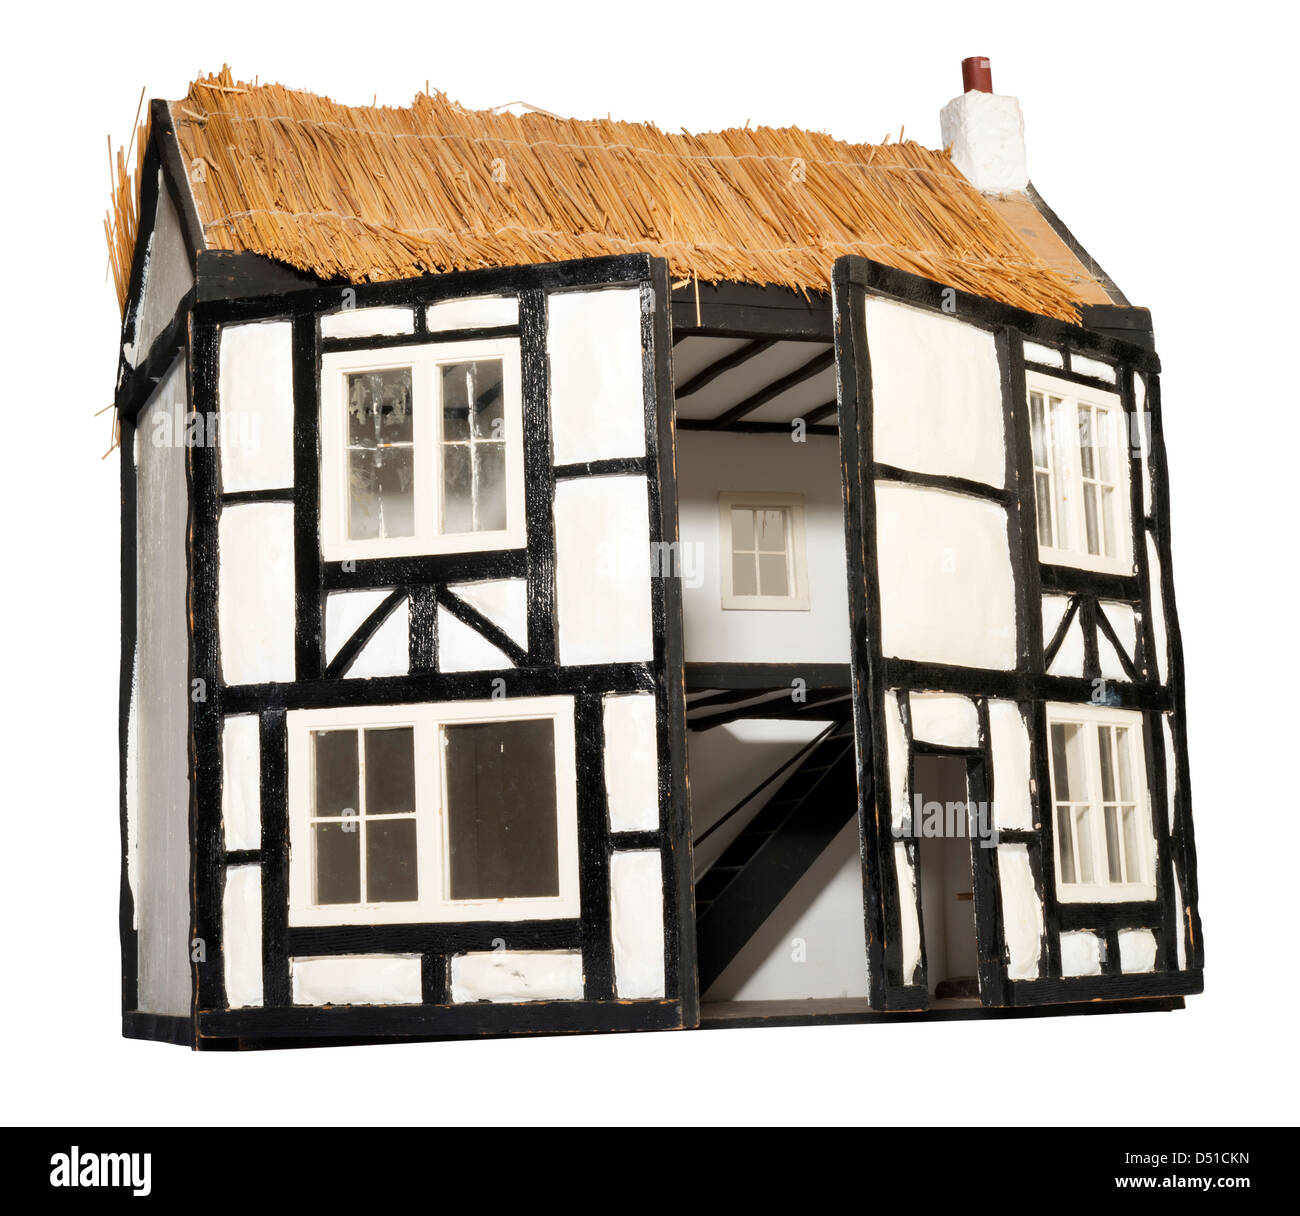 thatched roof dolls house Stock Photo